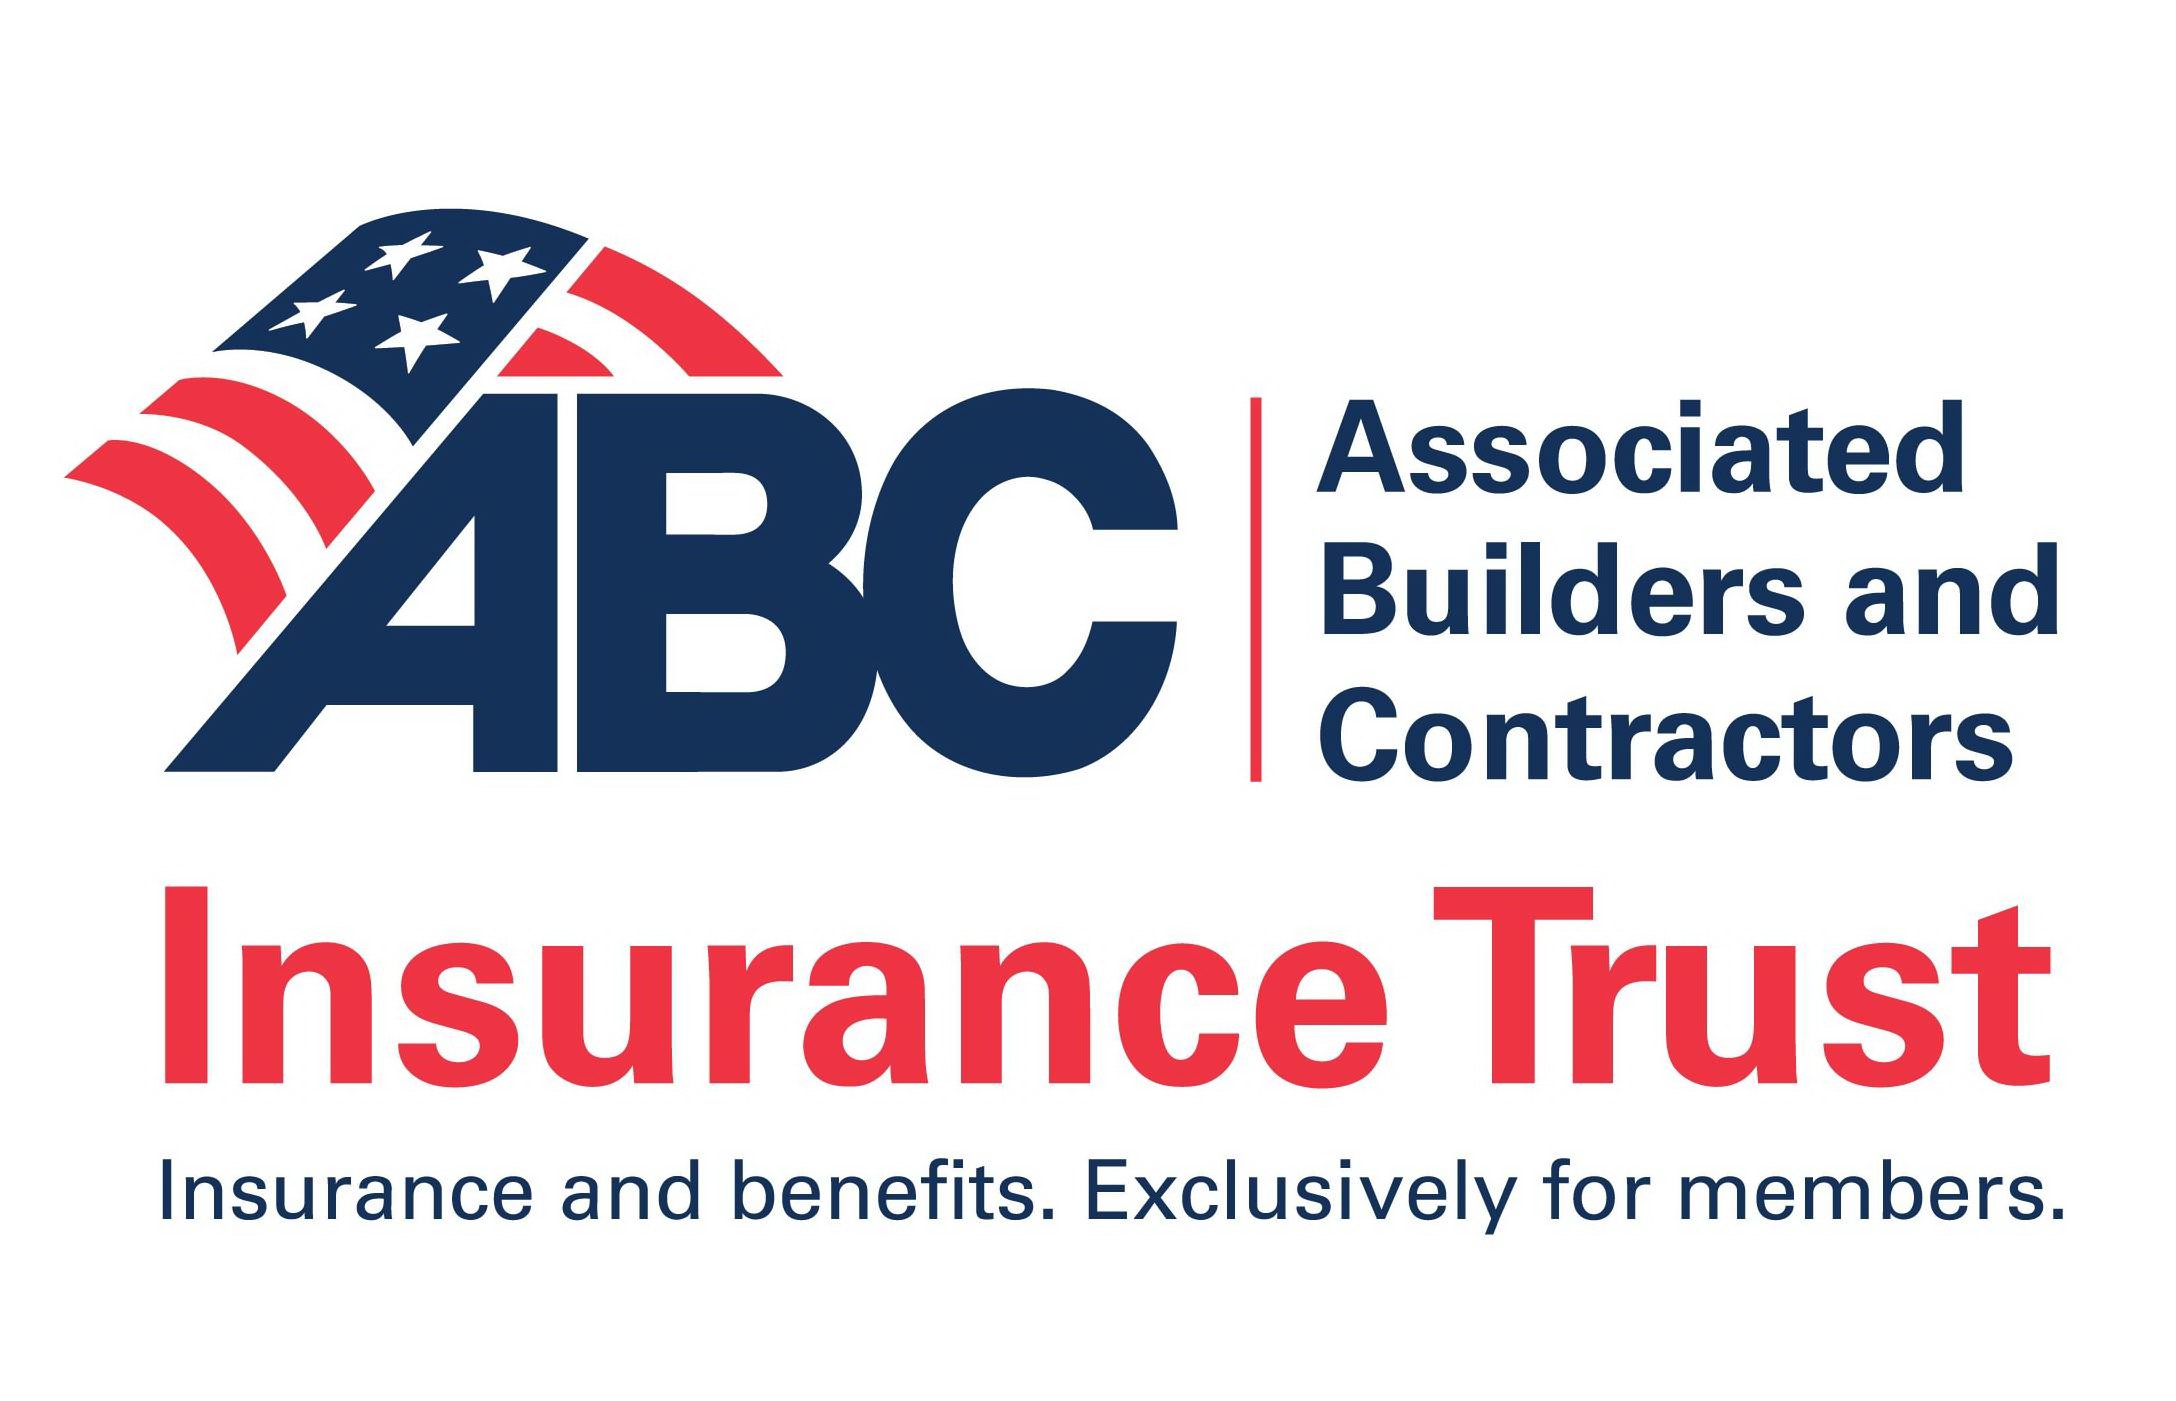  ABC ASSOCIATED BUILDERS AND CONTRACTORS INSURANCE TRUST INSURANCE AND BENEFITS. EXCLUSIVELY FOR MEMBERS.